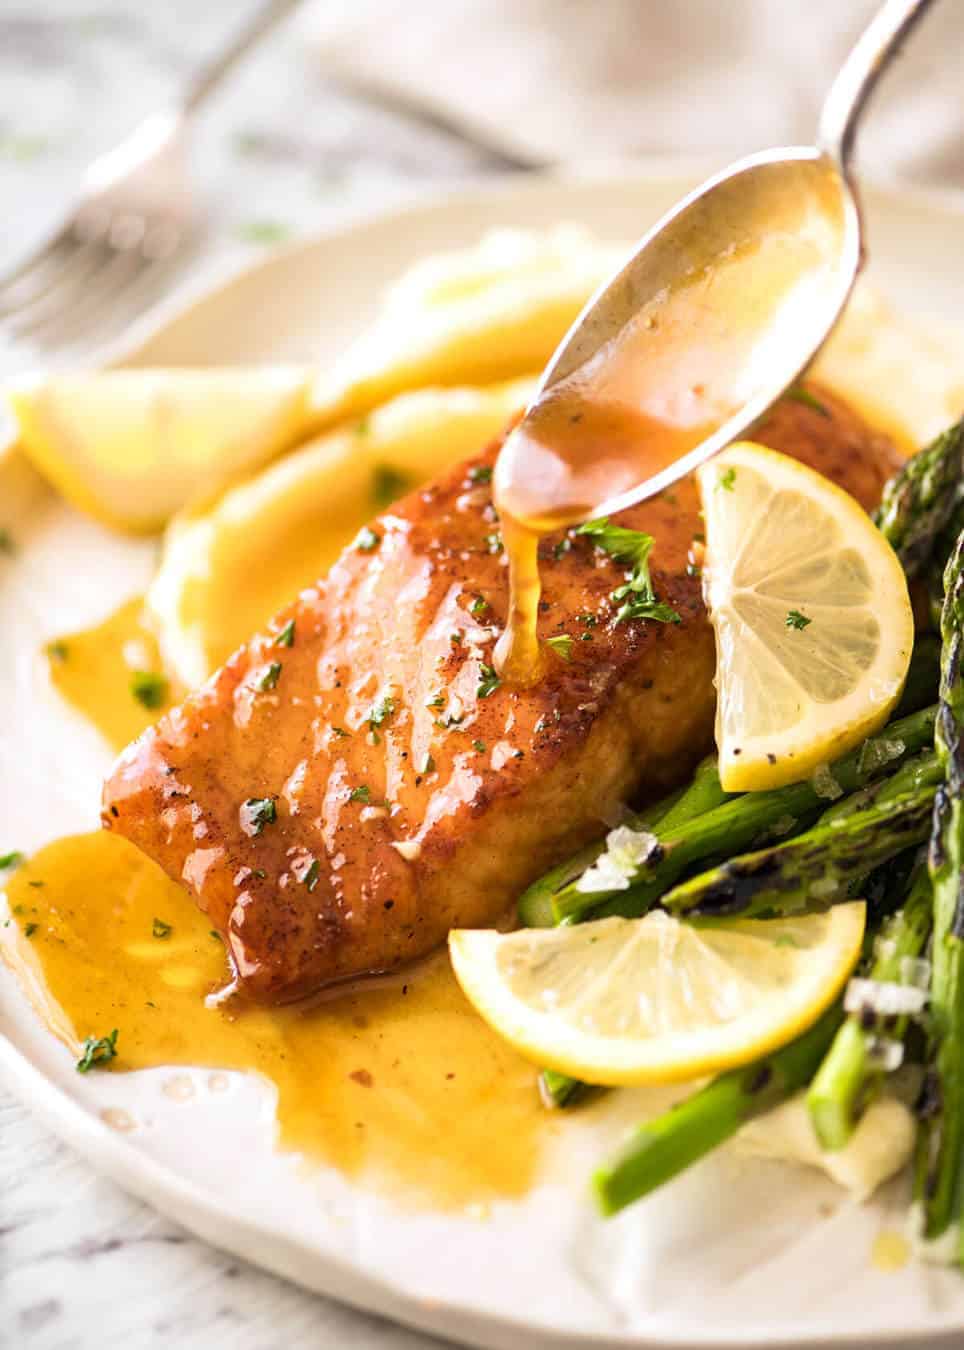 If this Lemon Honey Glazed Salmon takes more than 8 minutes to make, you've overcooked the salmon. That sauce is lip smackingly delicious! www.recipetineats.com